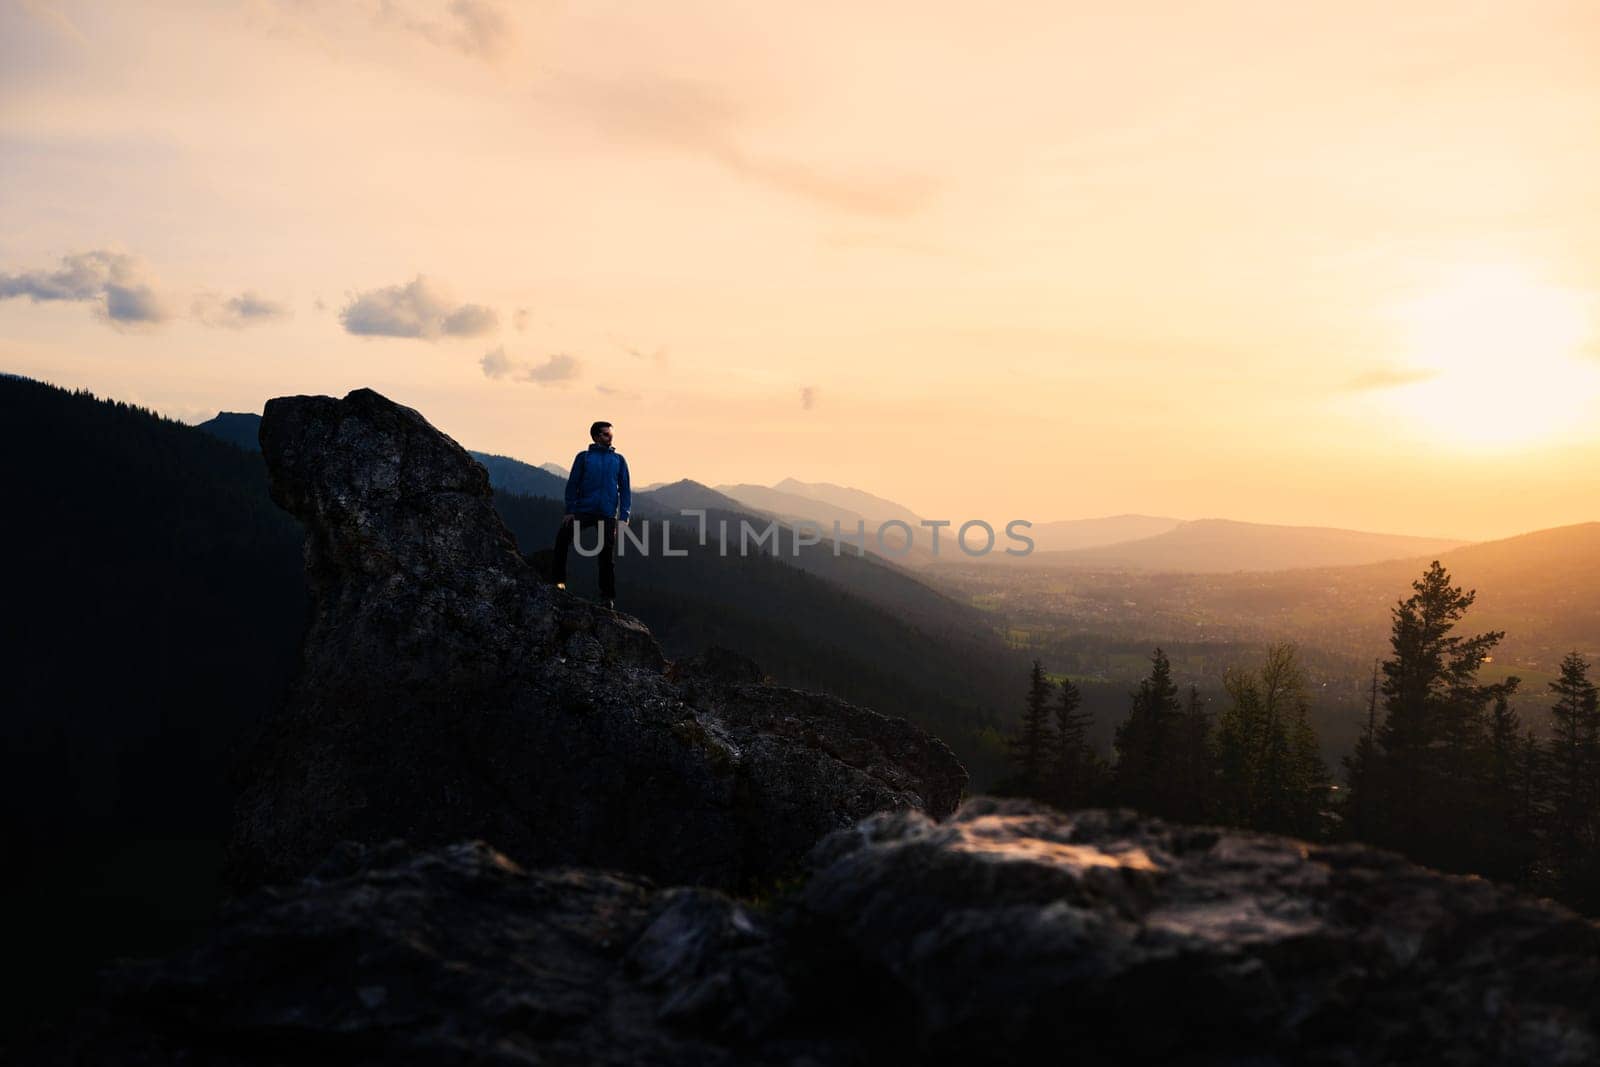 At dusk, a person stands on a mountain peak, surrounded by the natural landscape. The sky is painted with vibrant colors of the sunset